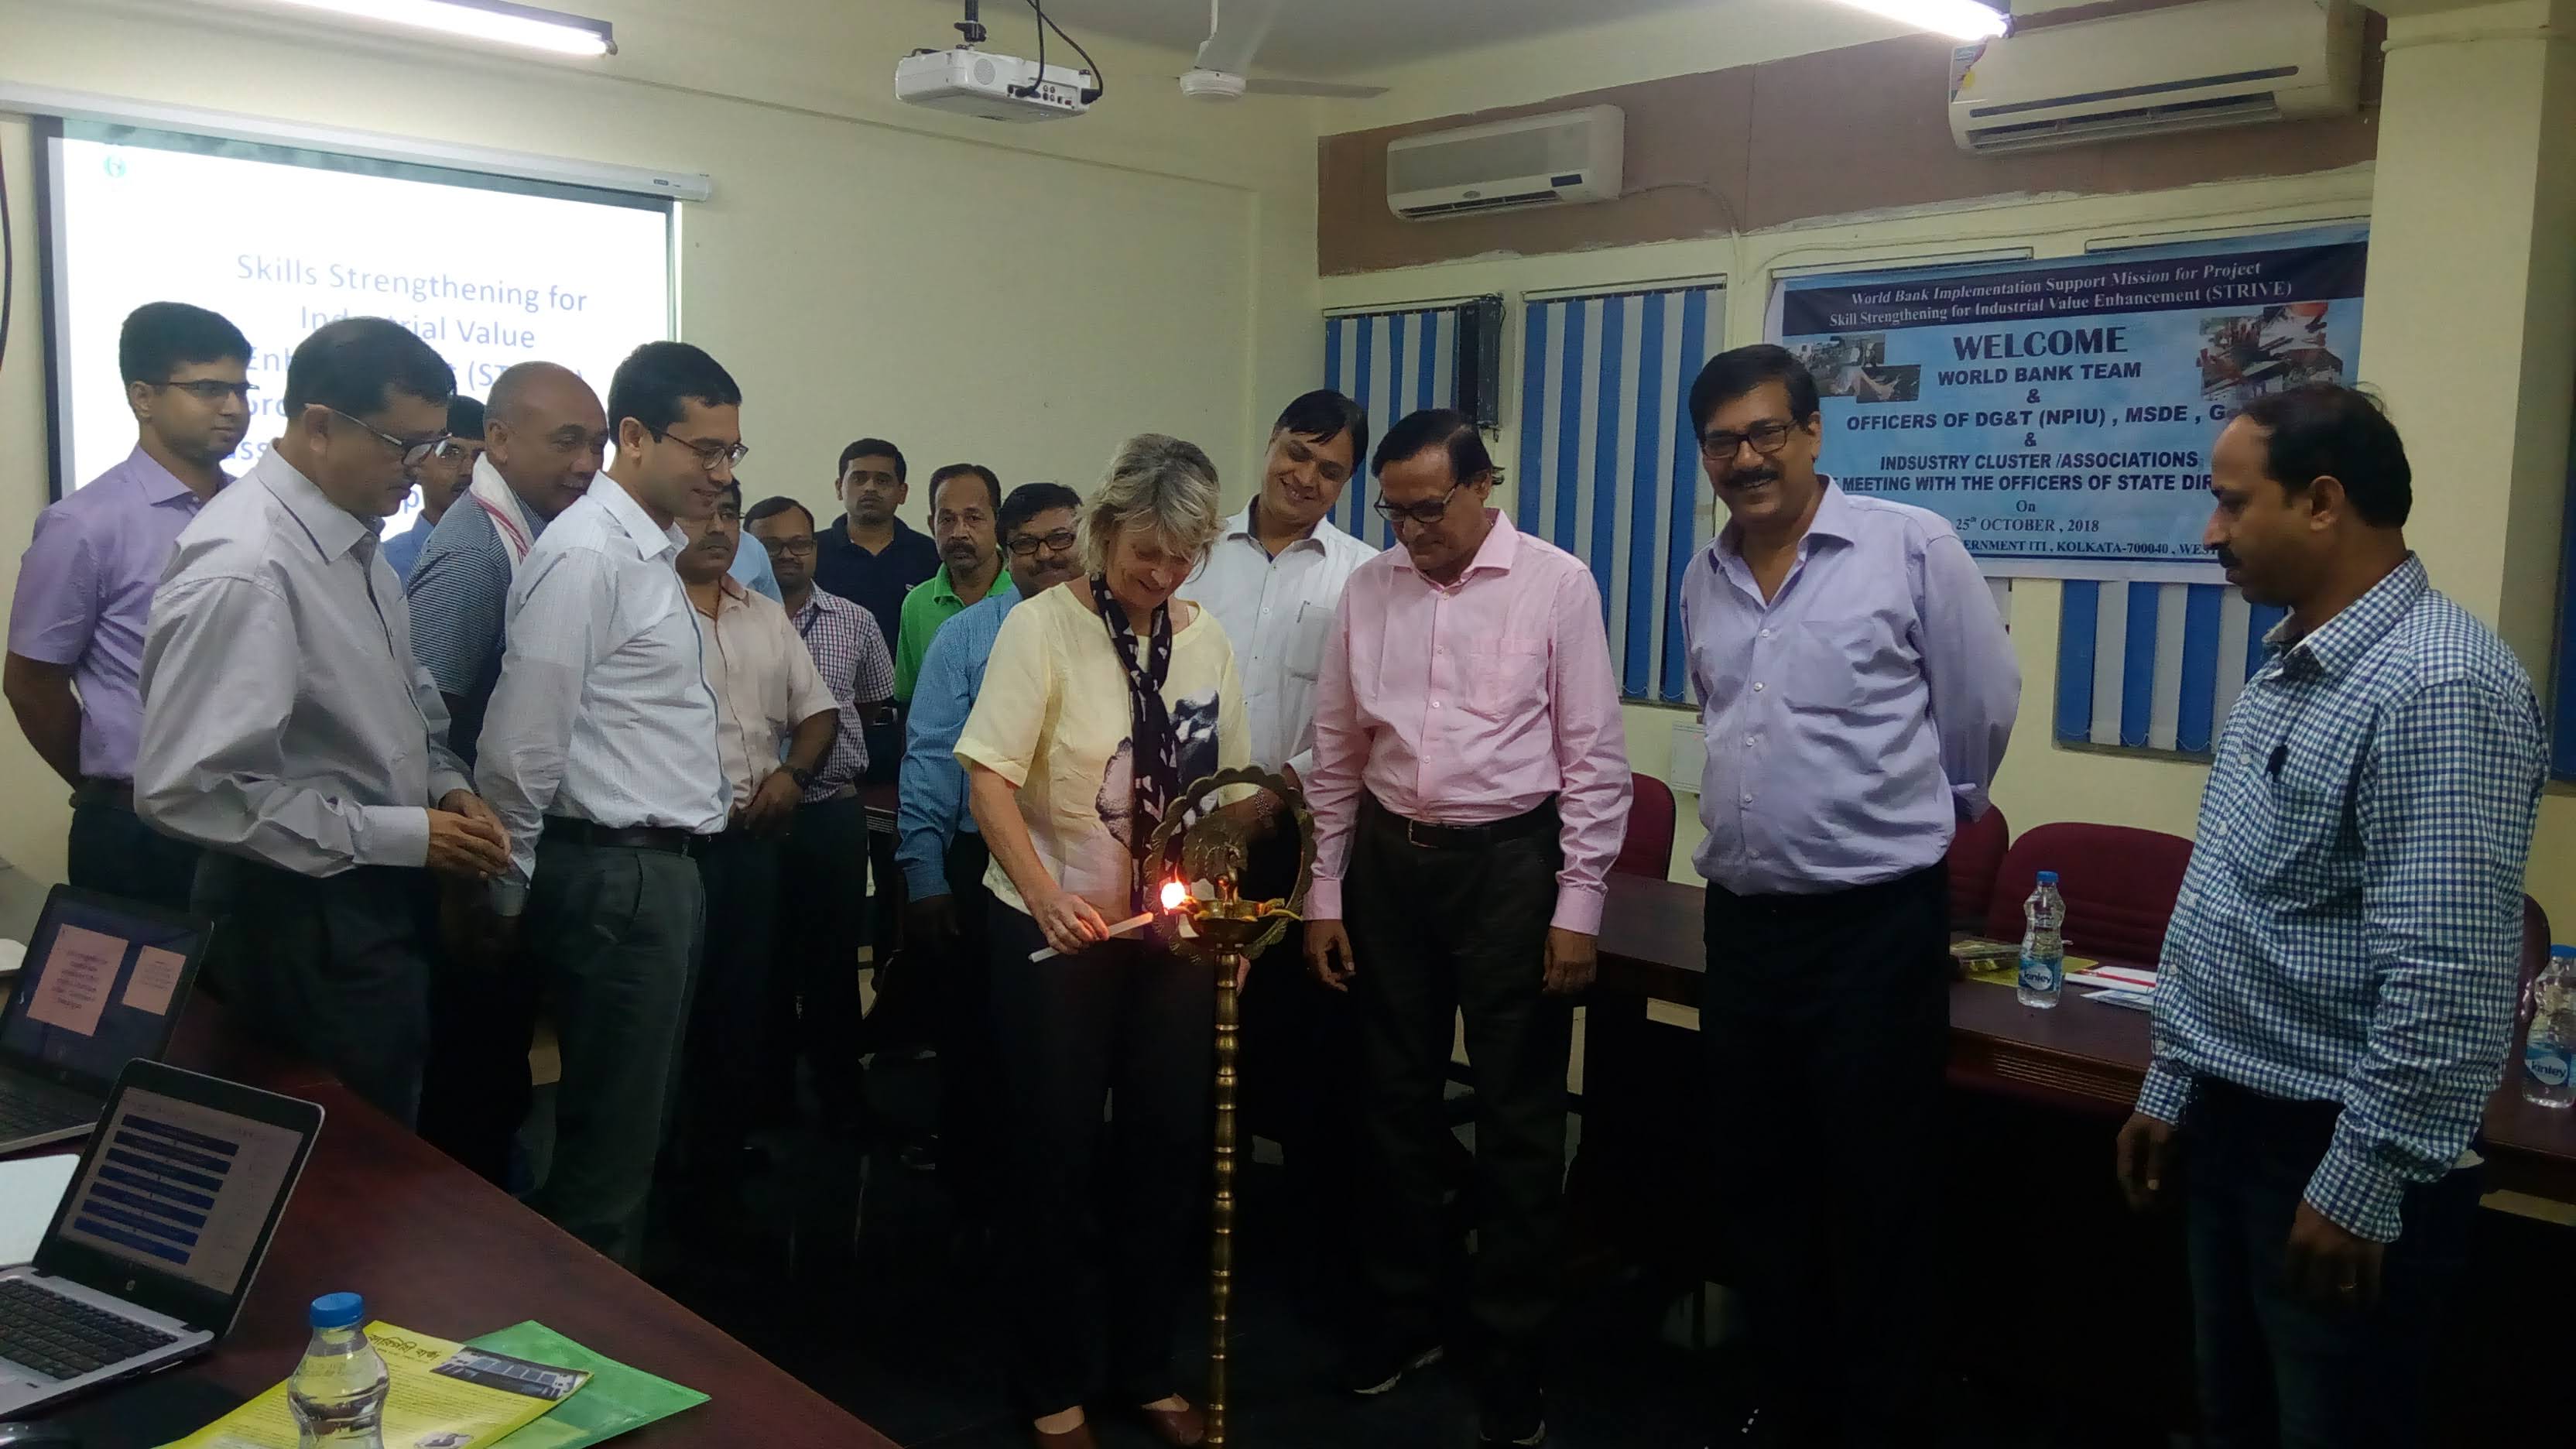 Inauguration by lighting the lamp by the dignitaries of World Bank